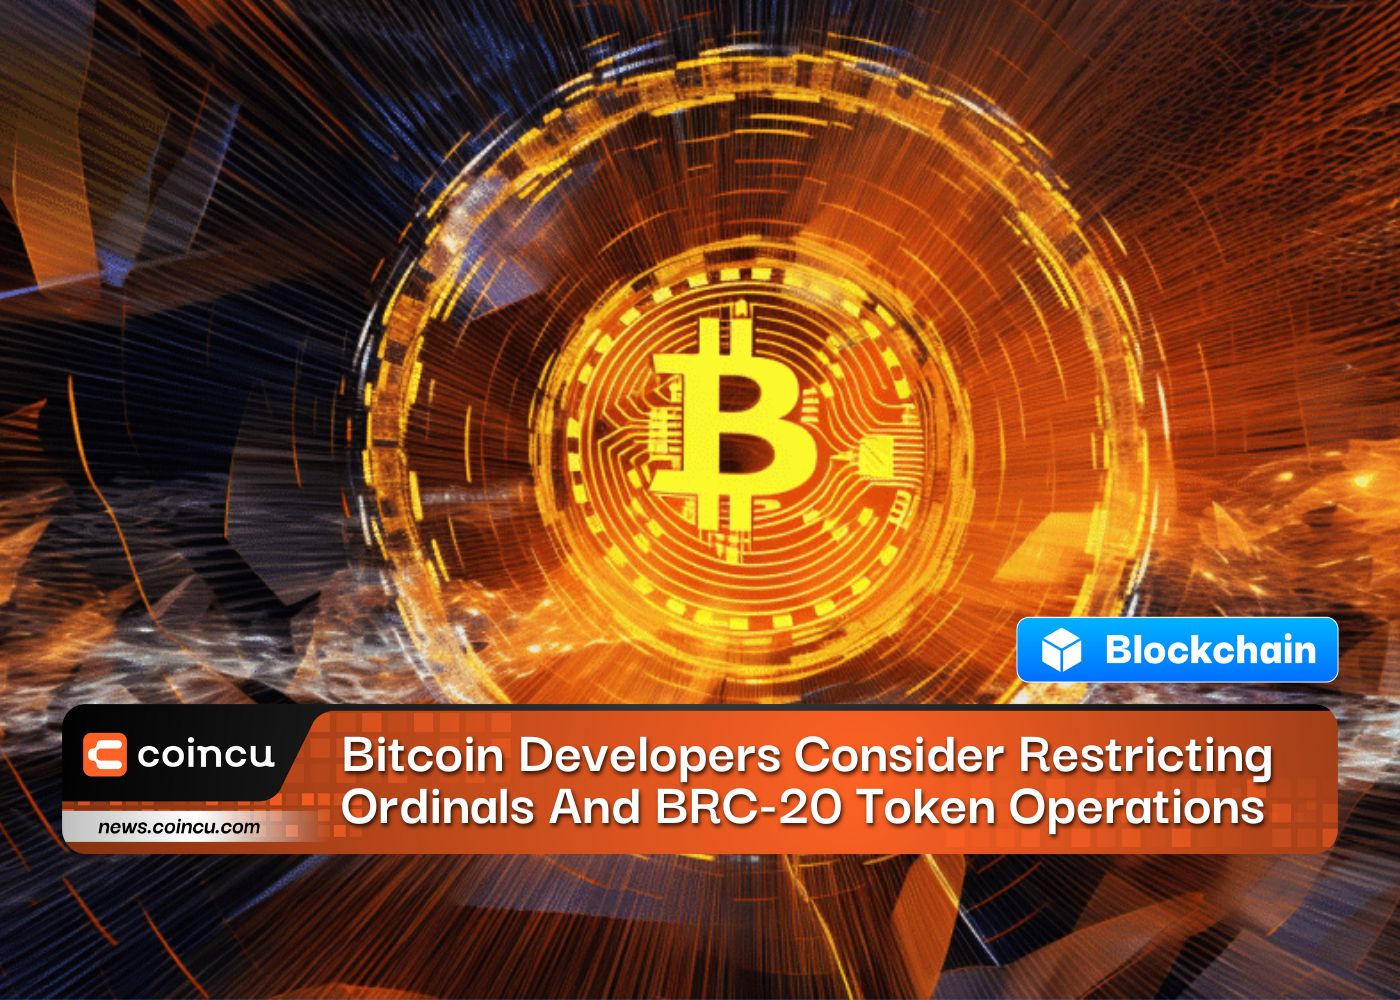 Bitcoin Developers Consider Restricting Ordinals And BRC-20 Token Operations